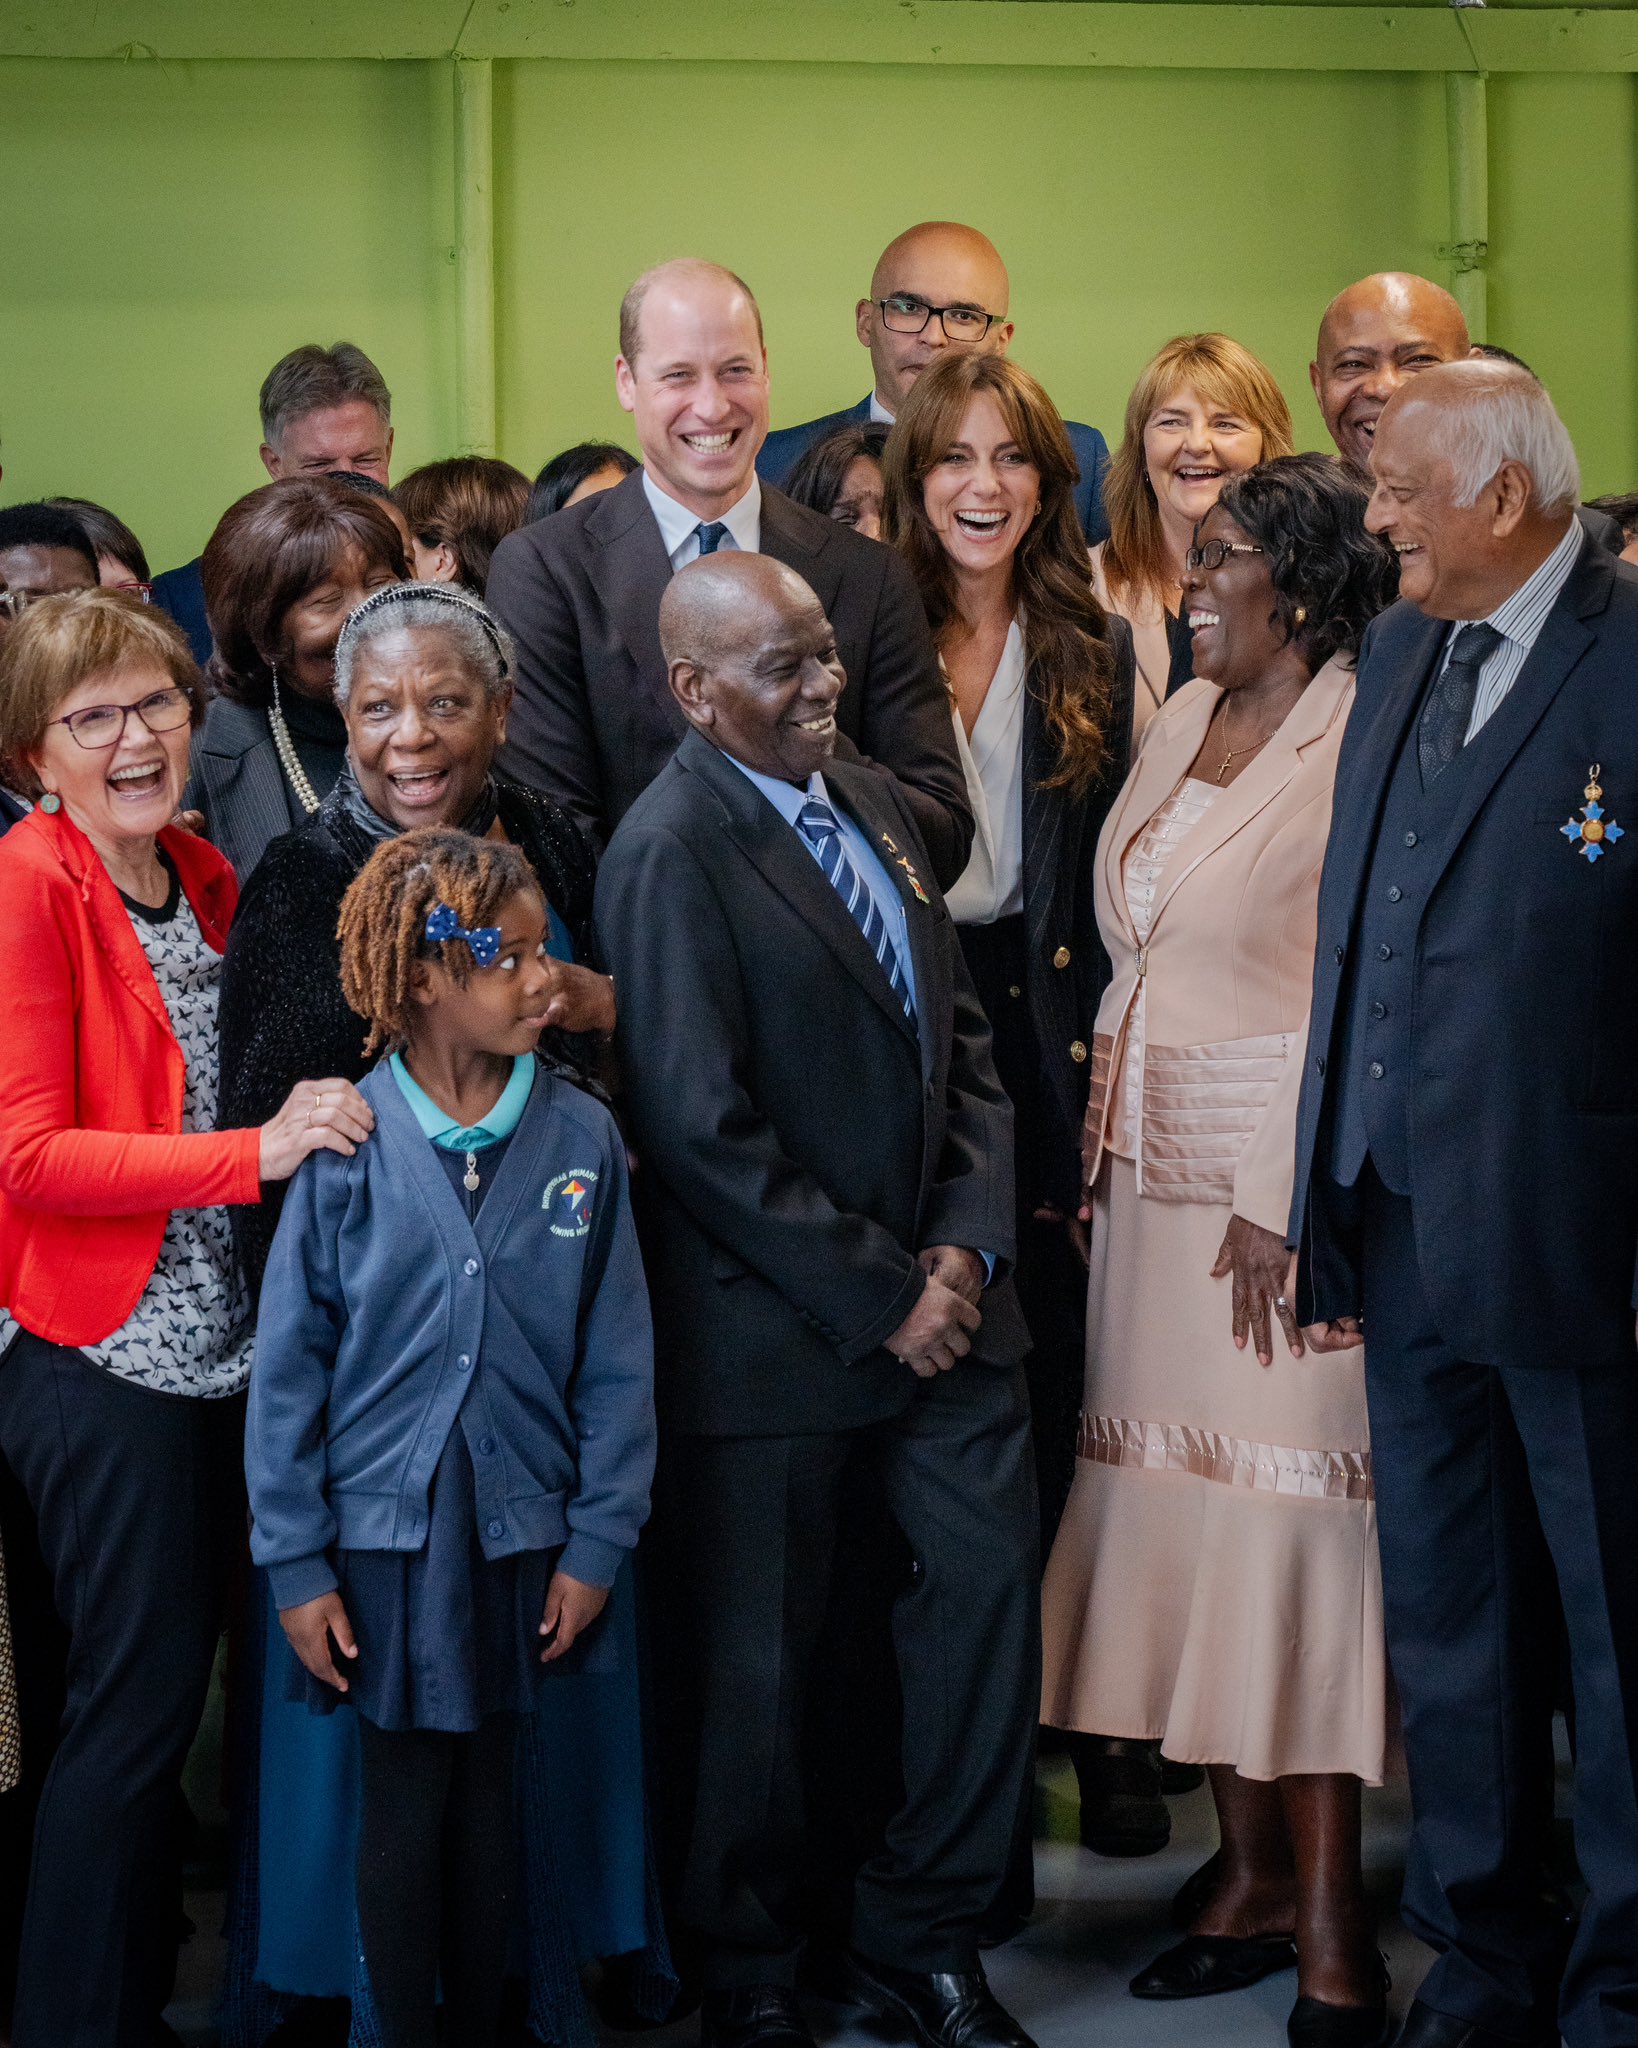 Kate Middleton and Prince William Kick Off Black History Month in Wales